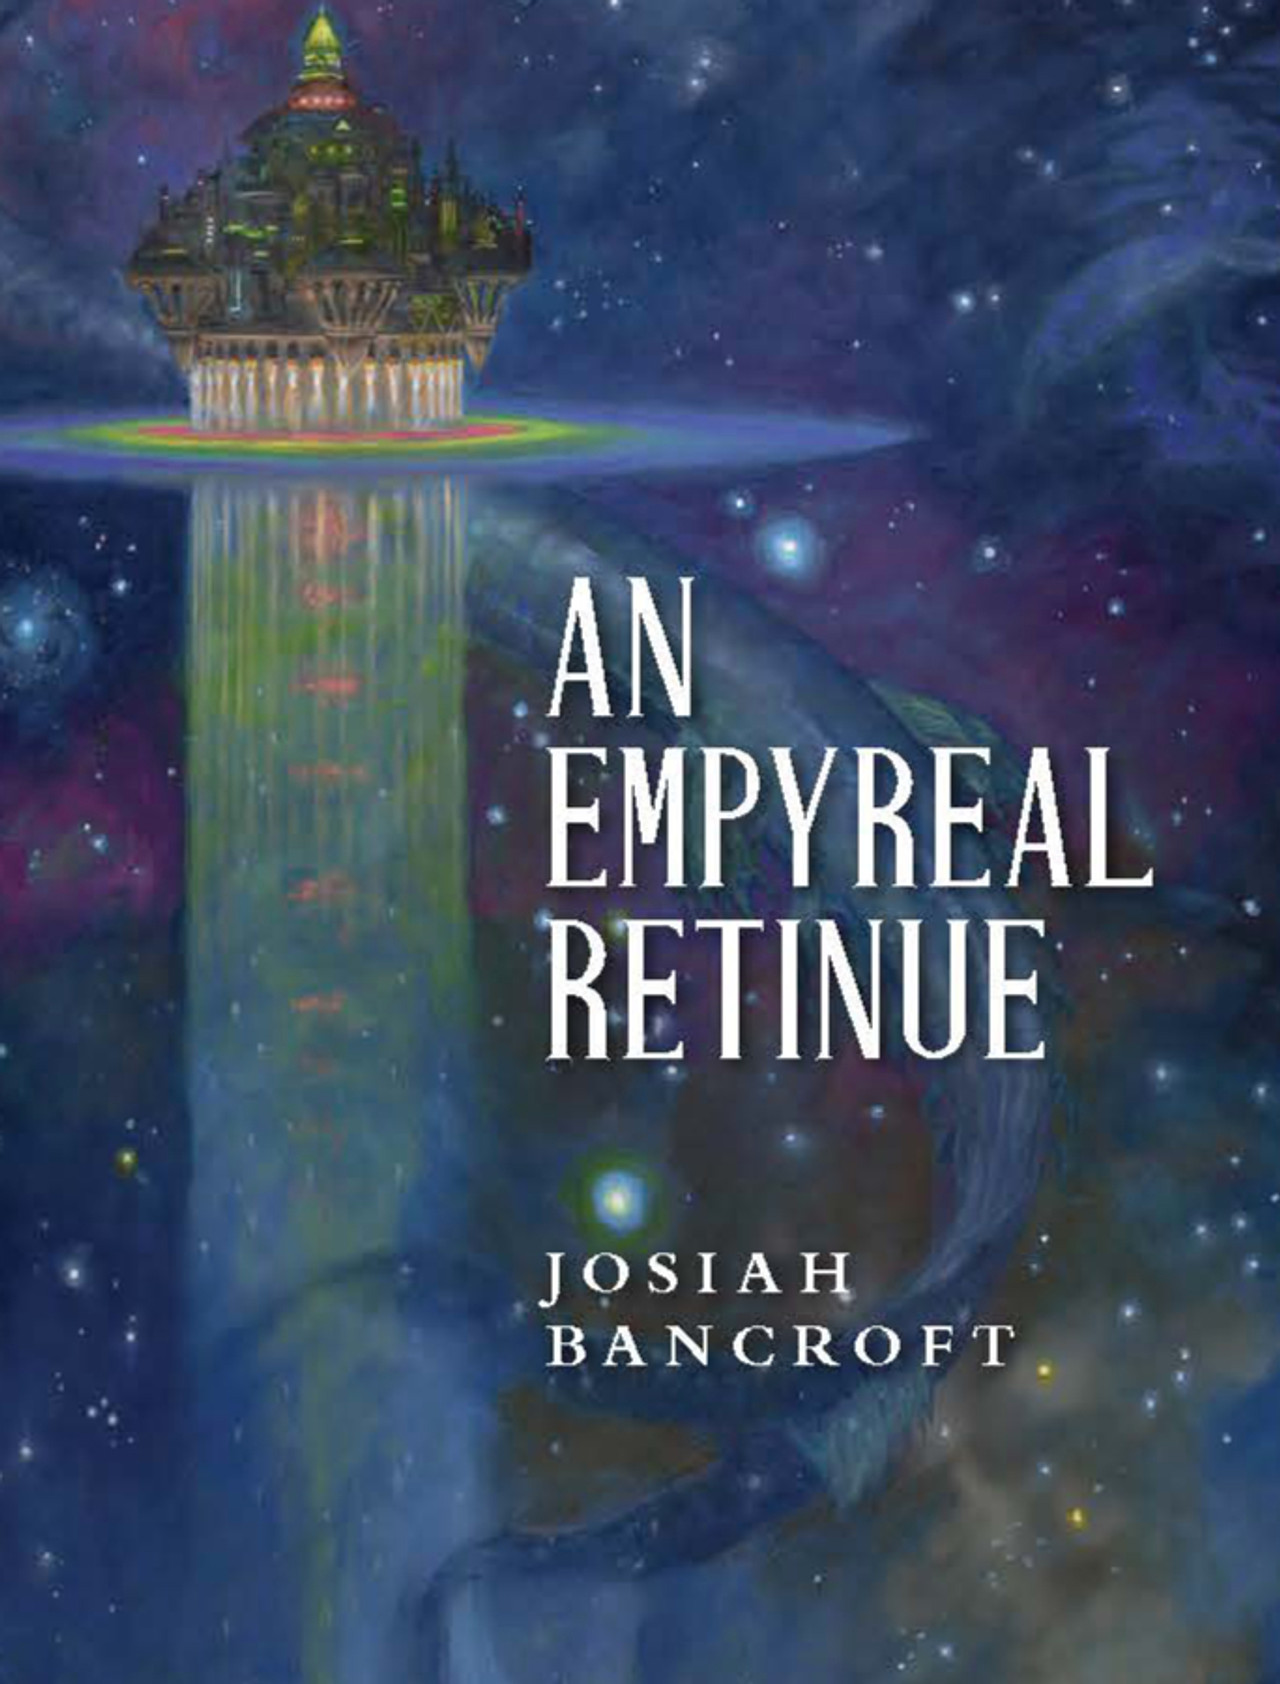 A Free Ebook from Josiah Bancroft—The Small Hands of Chokedamp